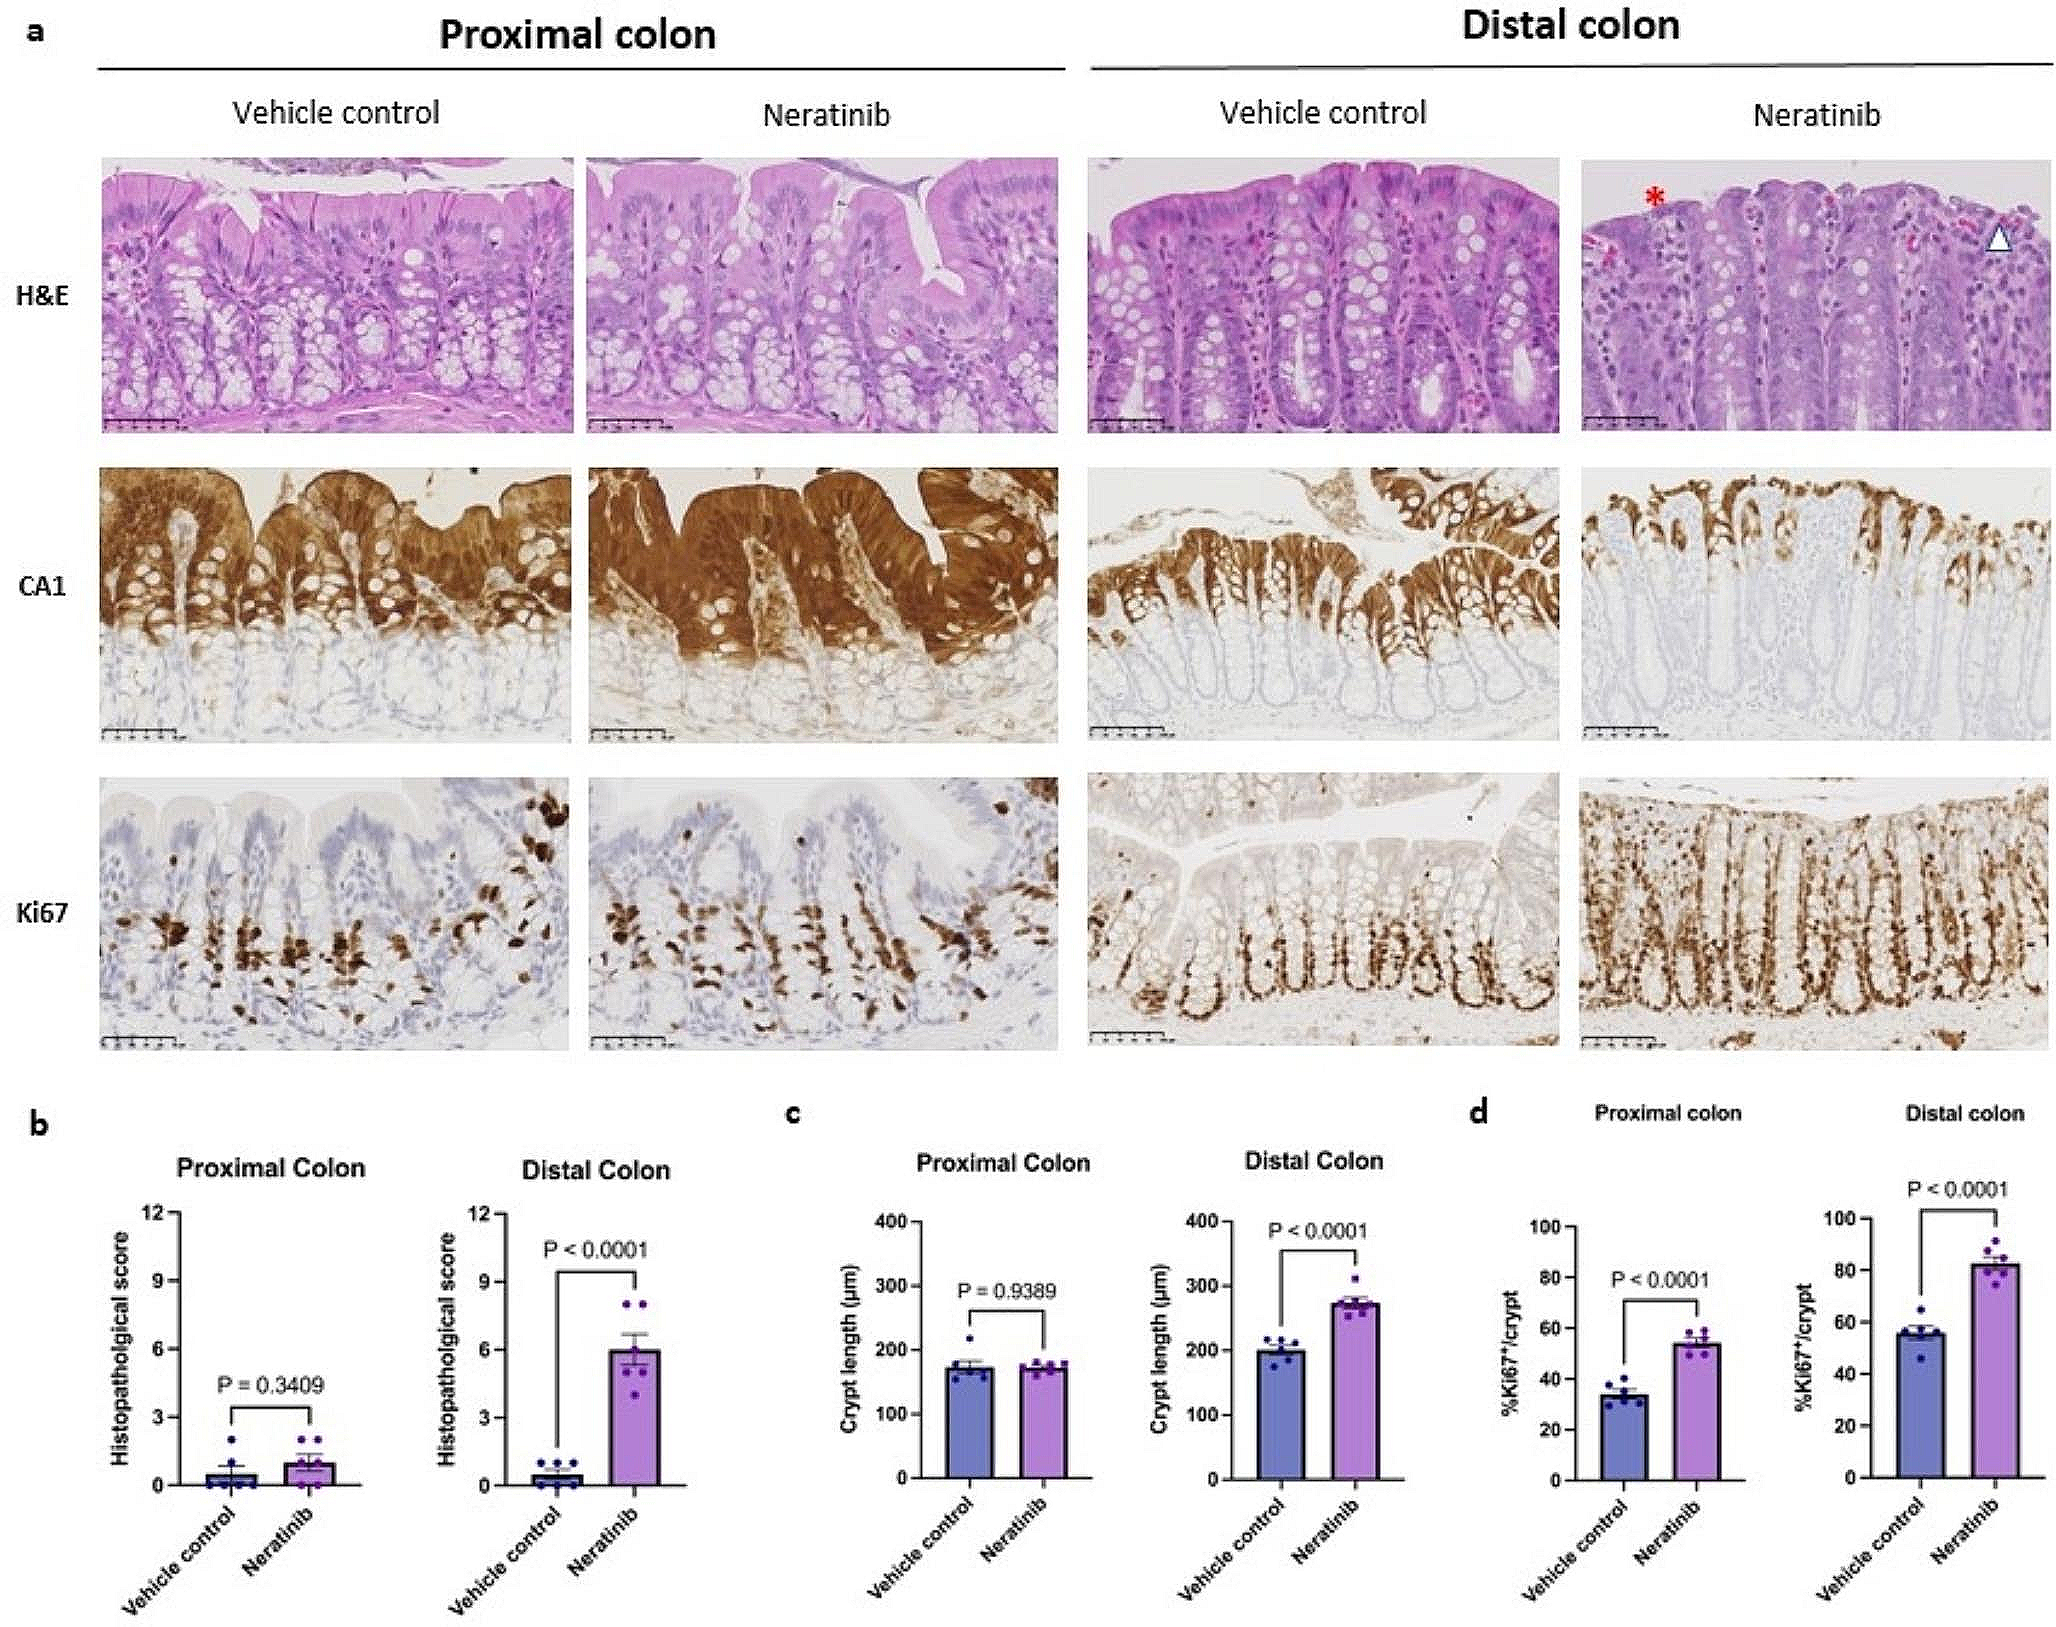 Ferroptosis – a potential feature underlying neratinib-induced colonic epithelial injury